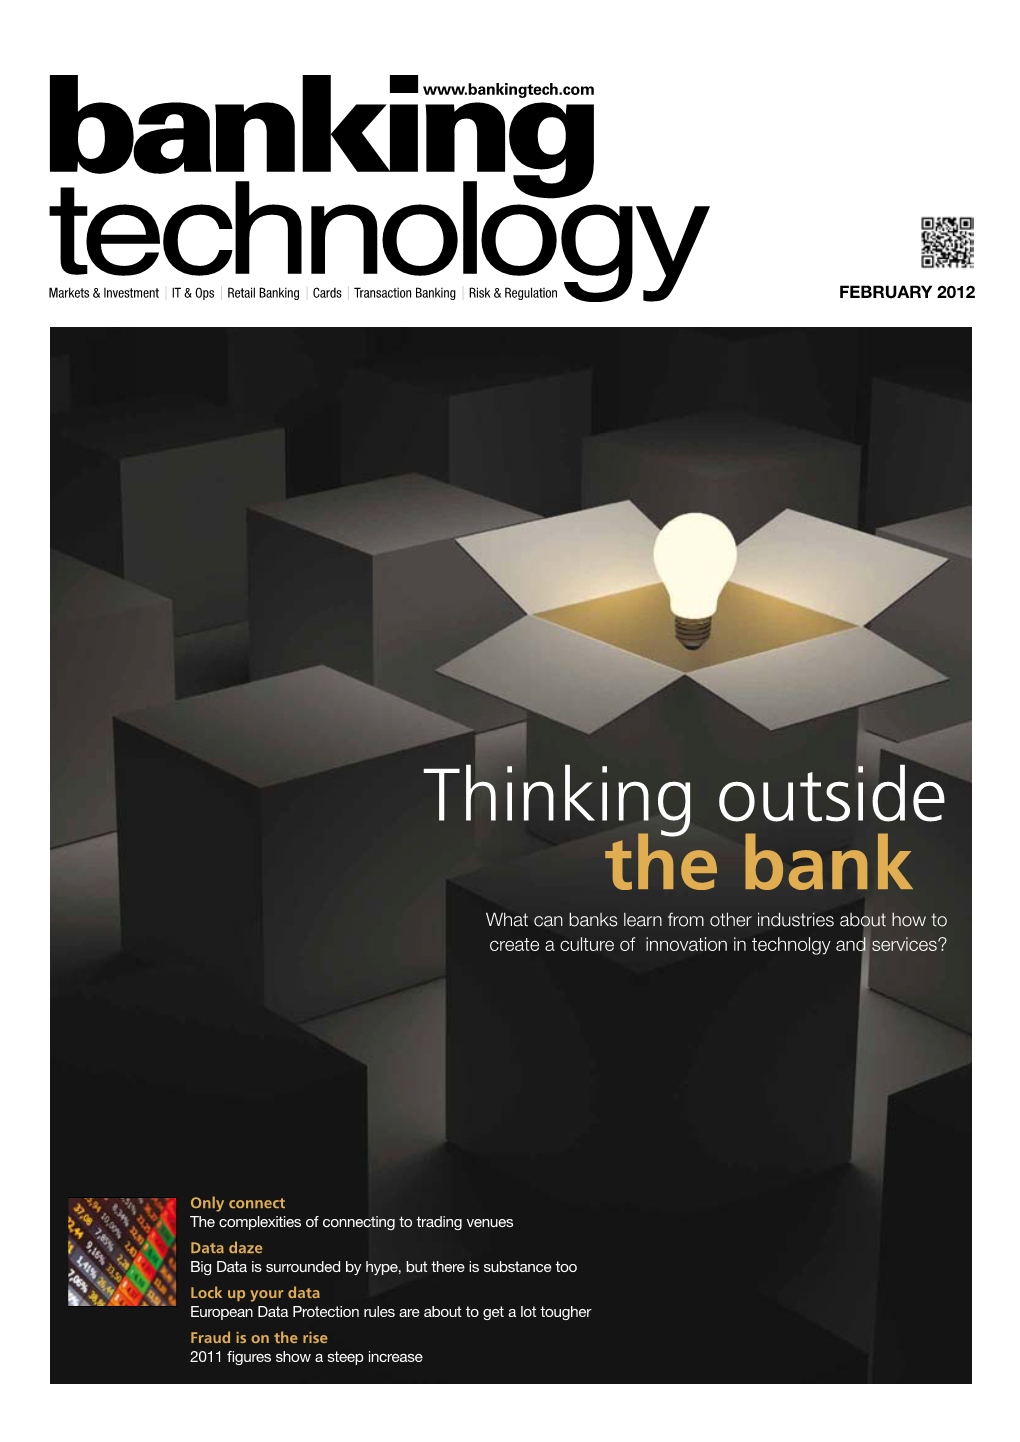 Thinking Outside the Bank What Can Banks Learn from Other Industries About How to Create a Culture of Innovation in Technolgy and Services?